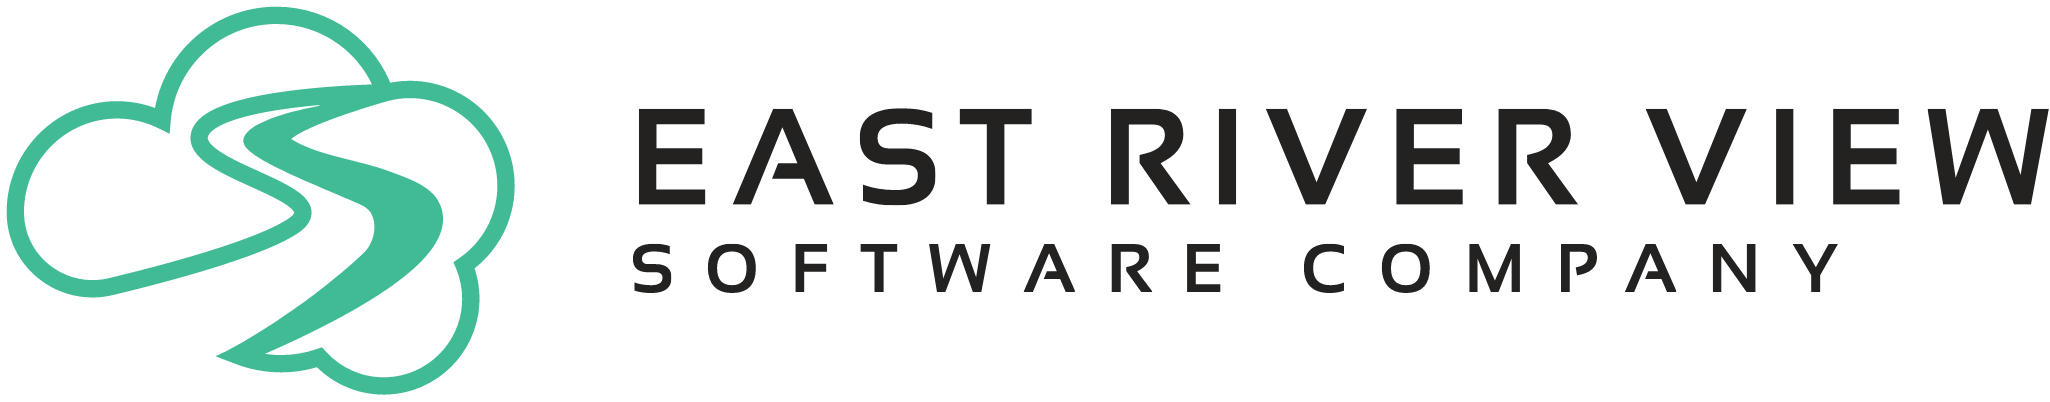 East River View Software Company